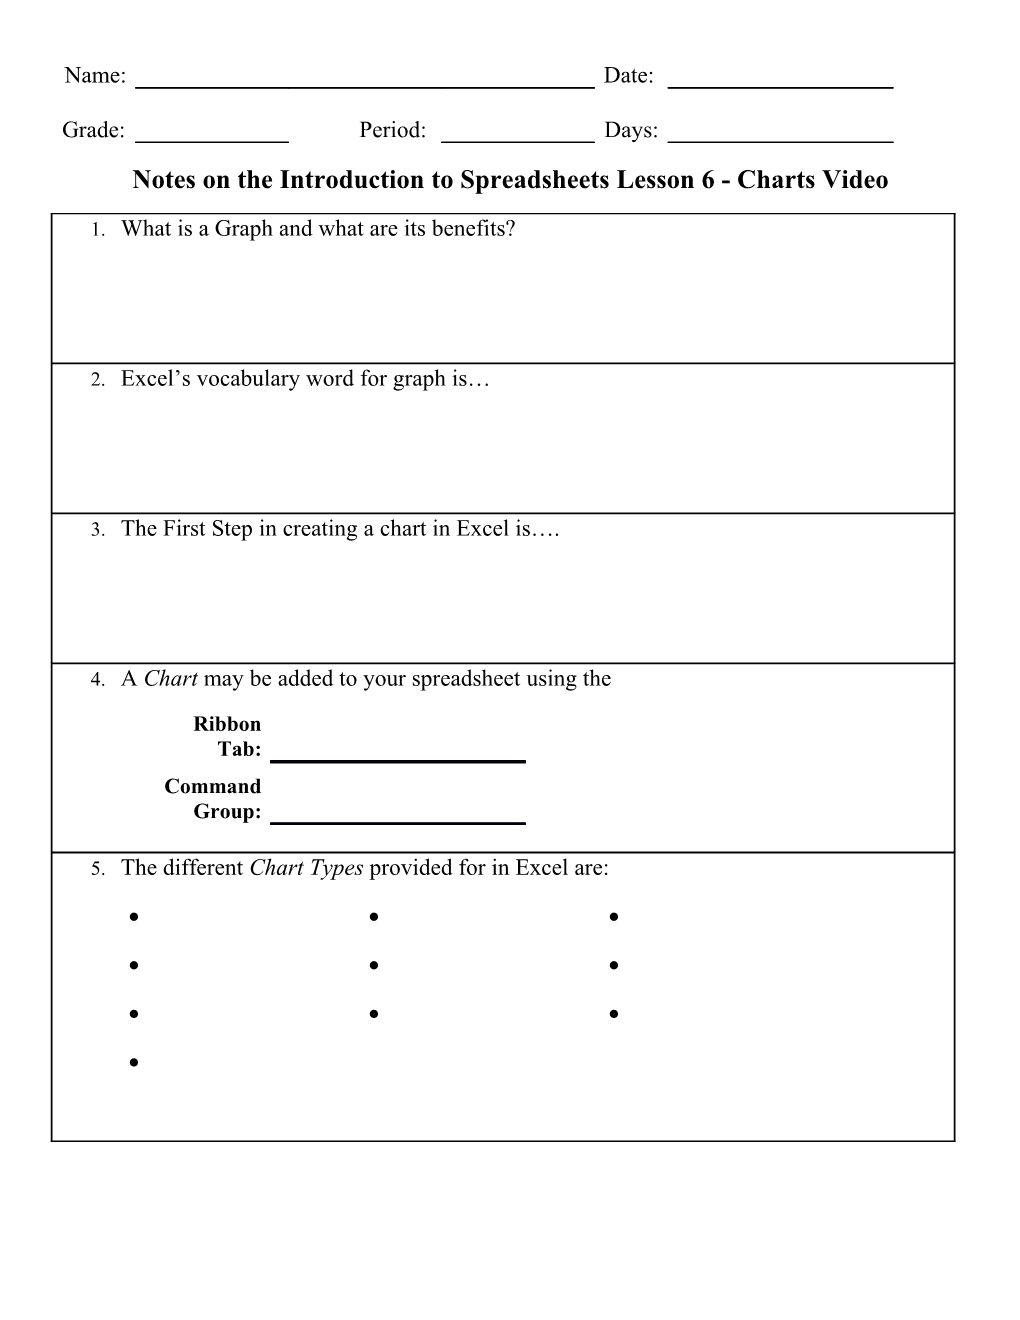 Notes on the Introduction to Spreadsheets Lesson 6- Charts Video